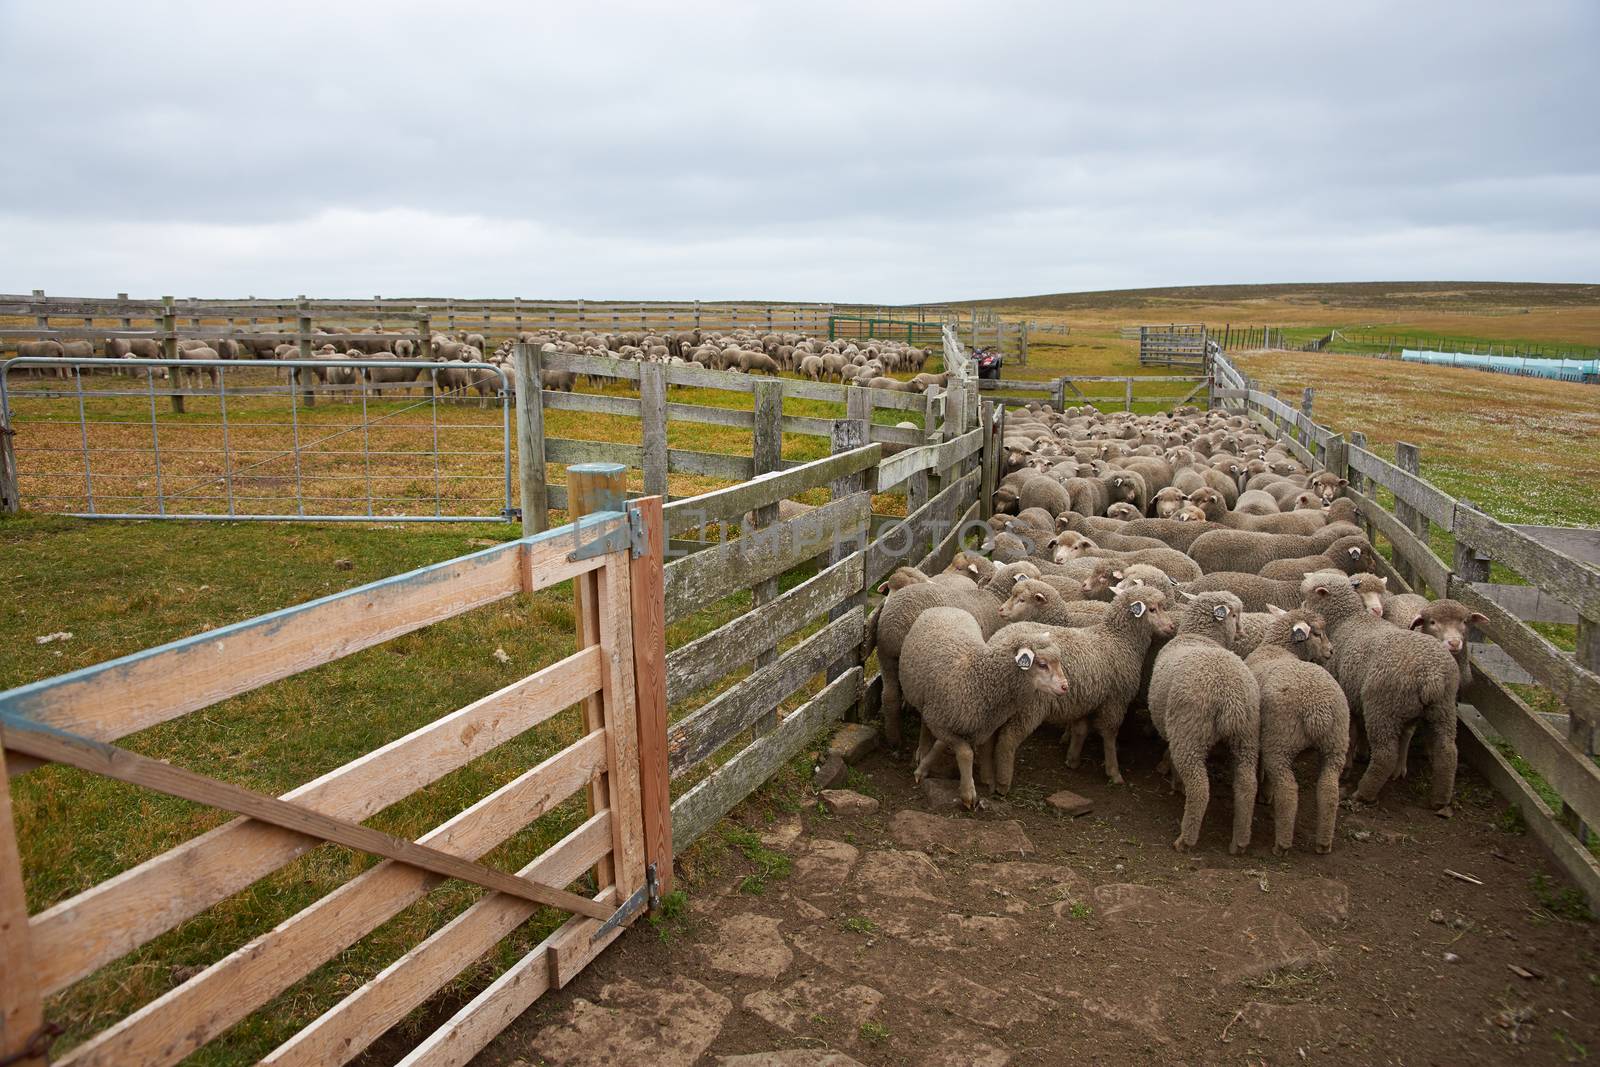 Sheep in a Corral by JeremyRichards